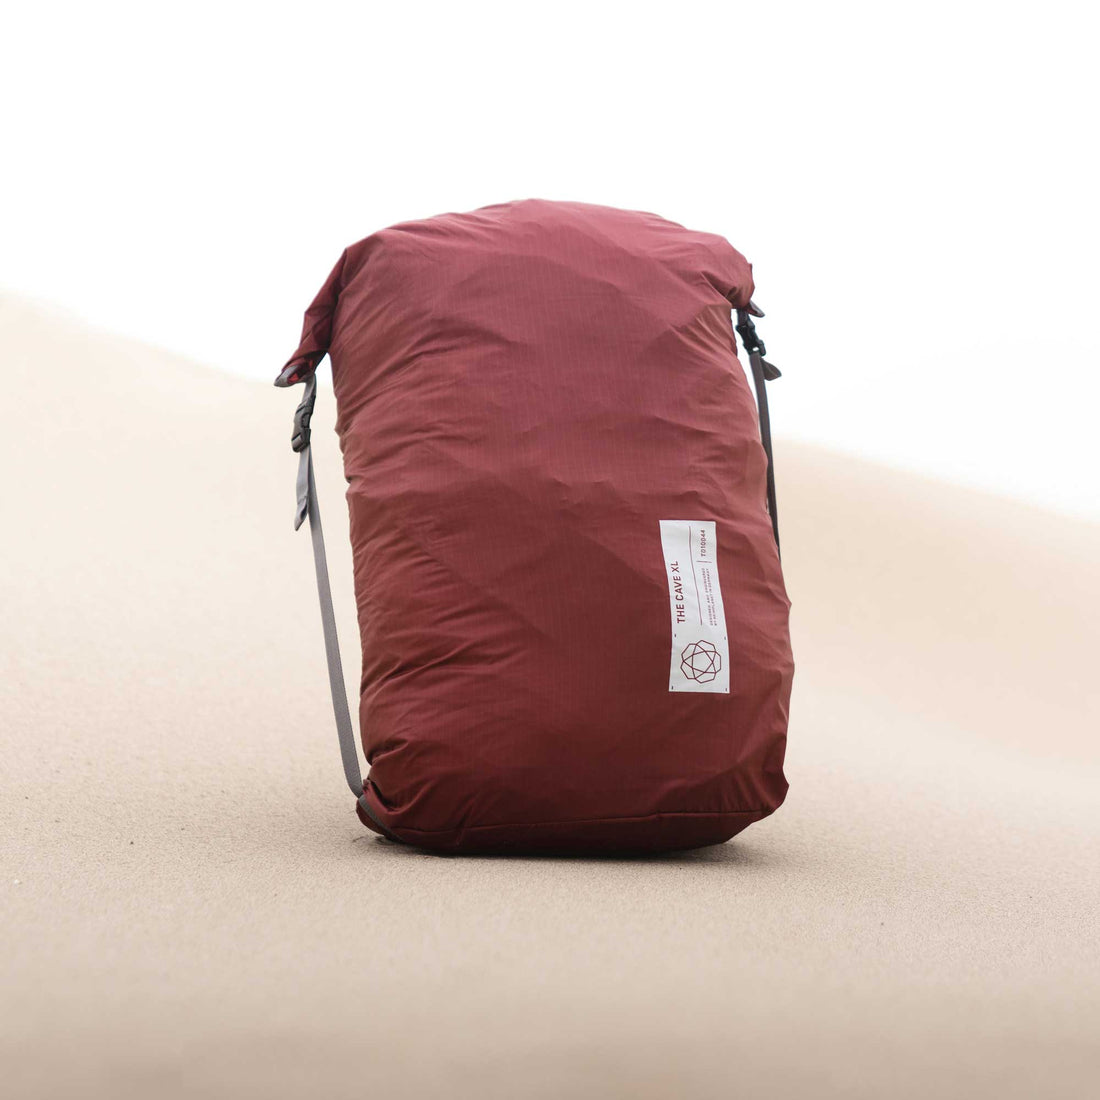 【HEIMPLANET】THE CACE XL,4-SEASON ハイムプラネット ケイブXL 4-シーズン